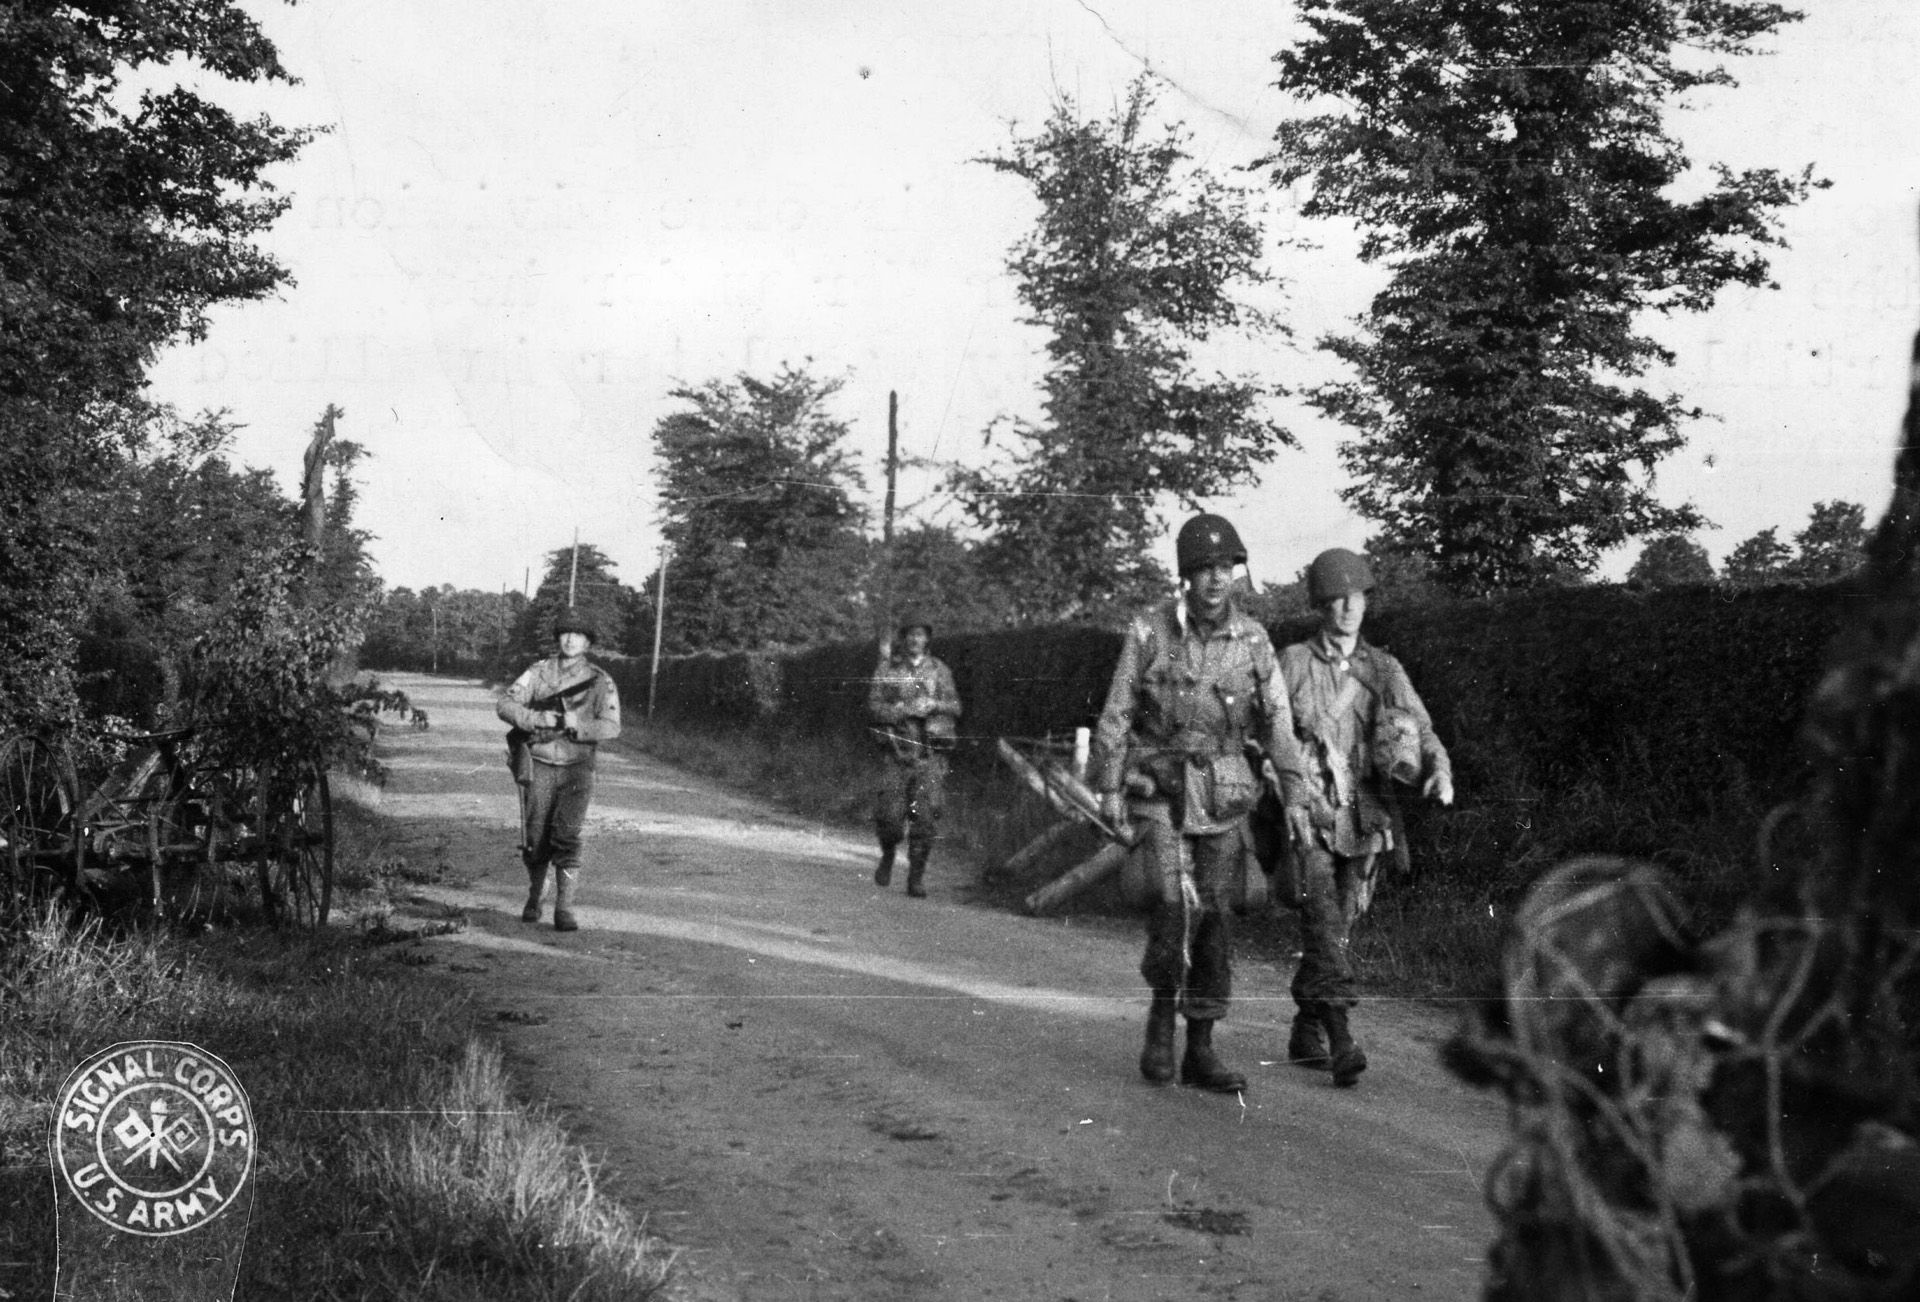 Near the village of Ste. Mere Eglise, which they captured on D-Day, paratroopers of the 82nd Airborne Division walk along a road lined with hedgerows. 